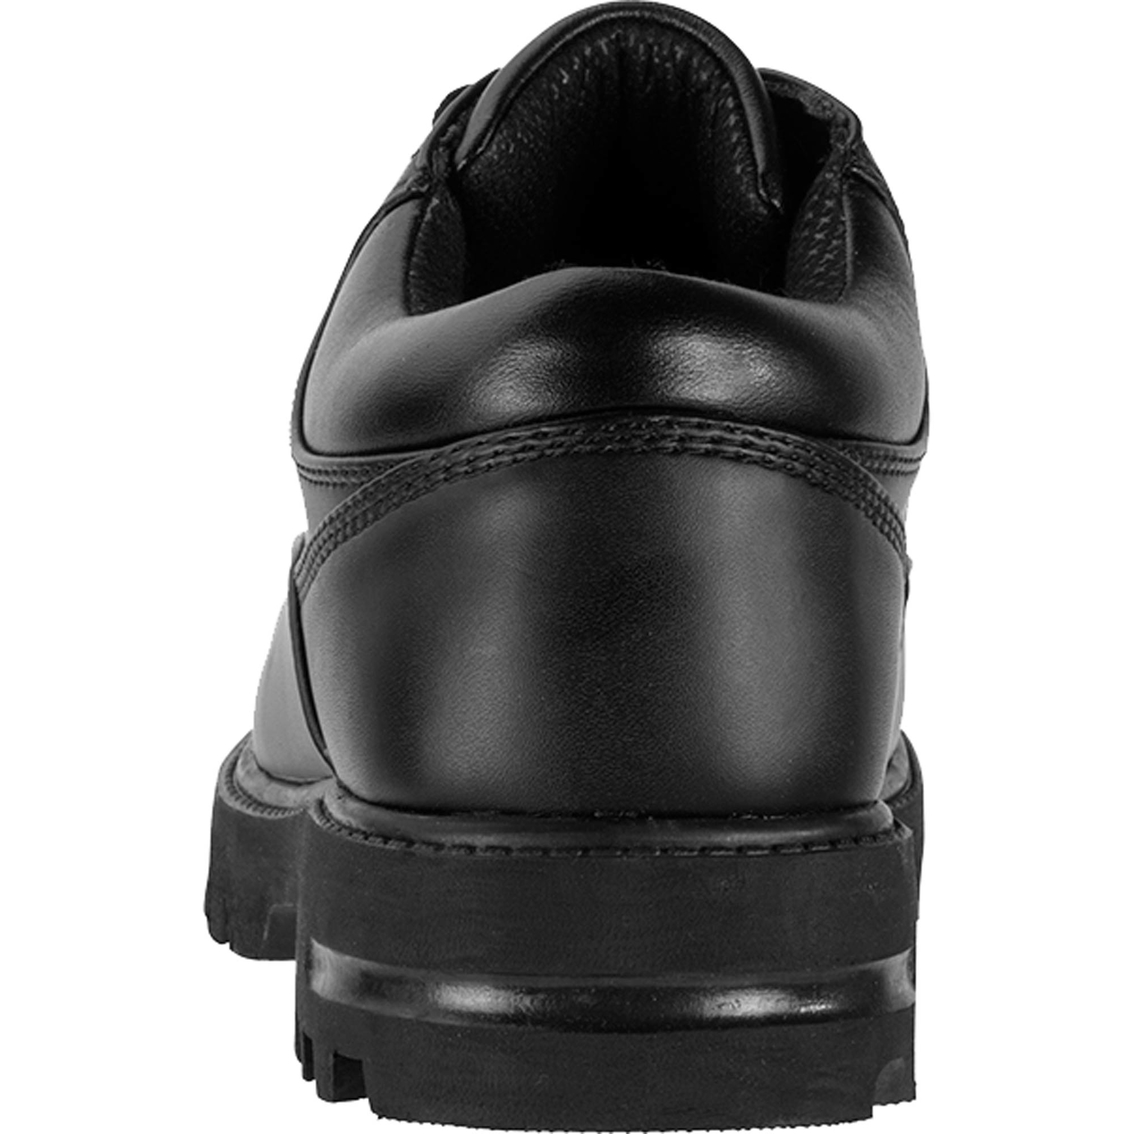 Lugz Men's Empire Lo Work Boots - Image 4 of 4